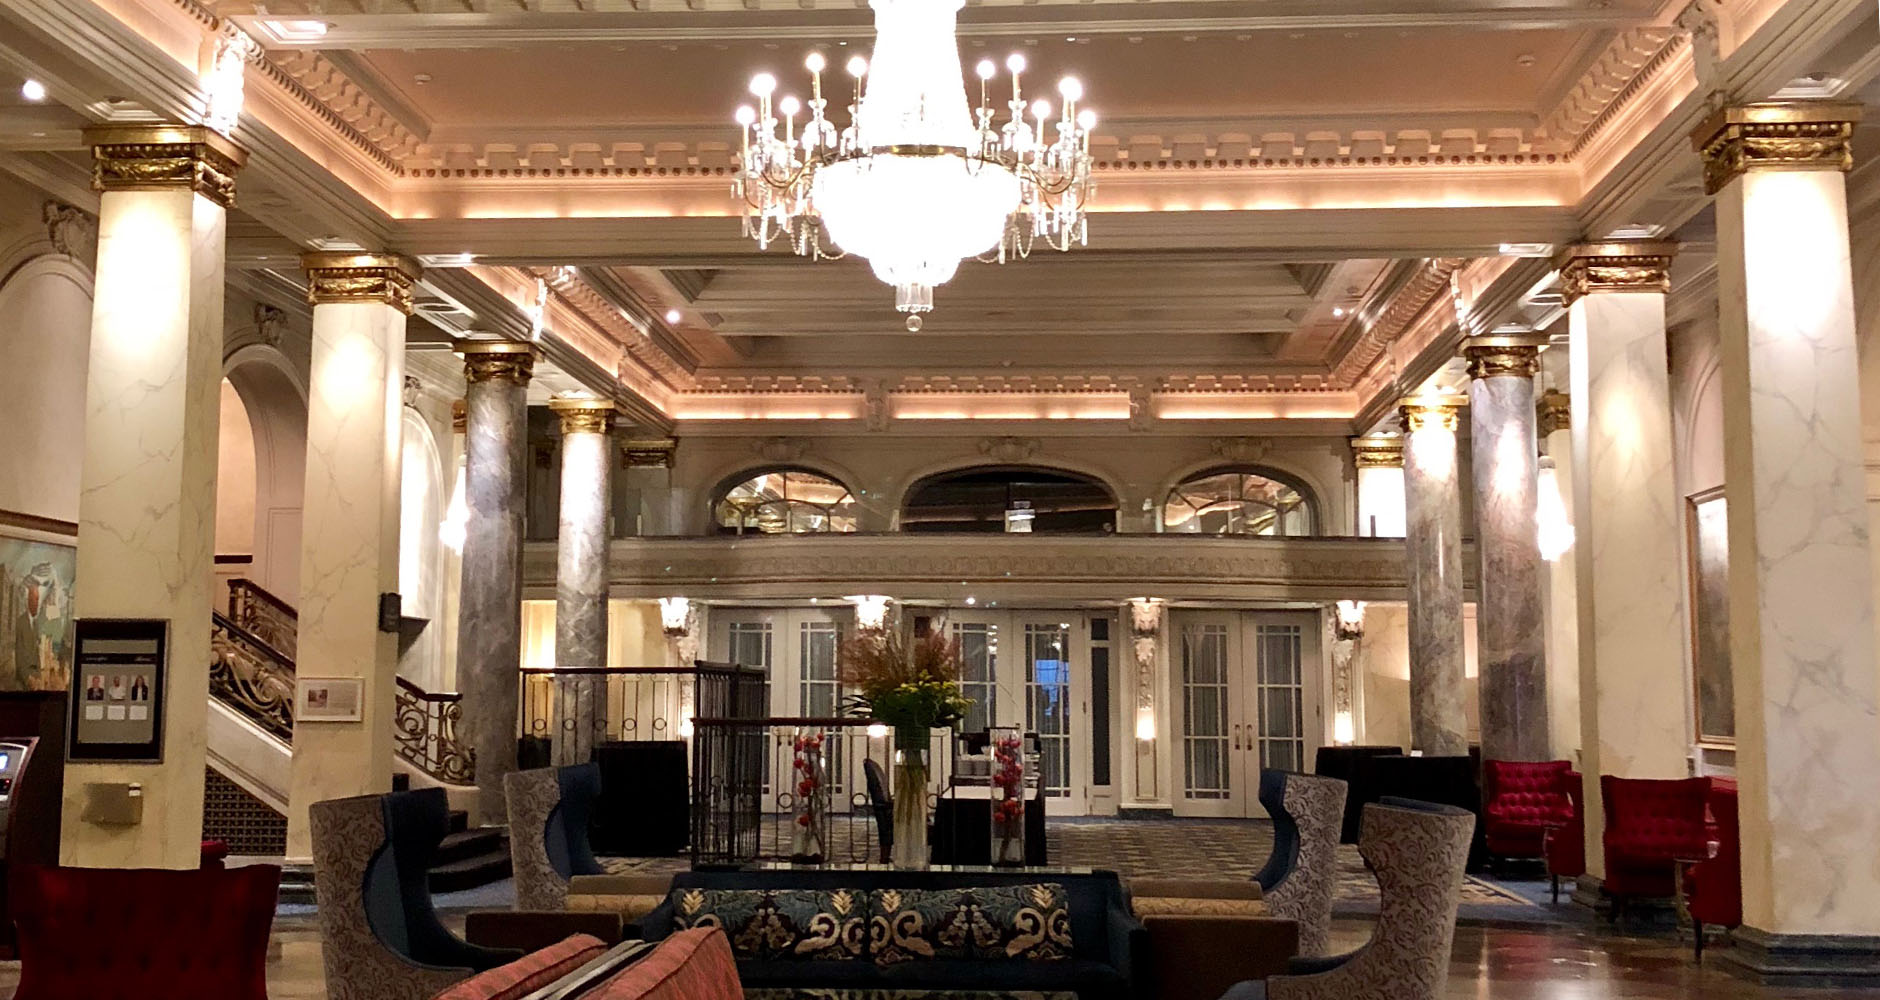 The lobby at the Fairmont Palliser in Downtown Calgary